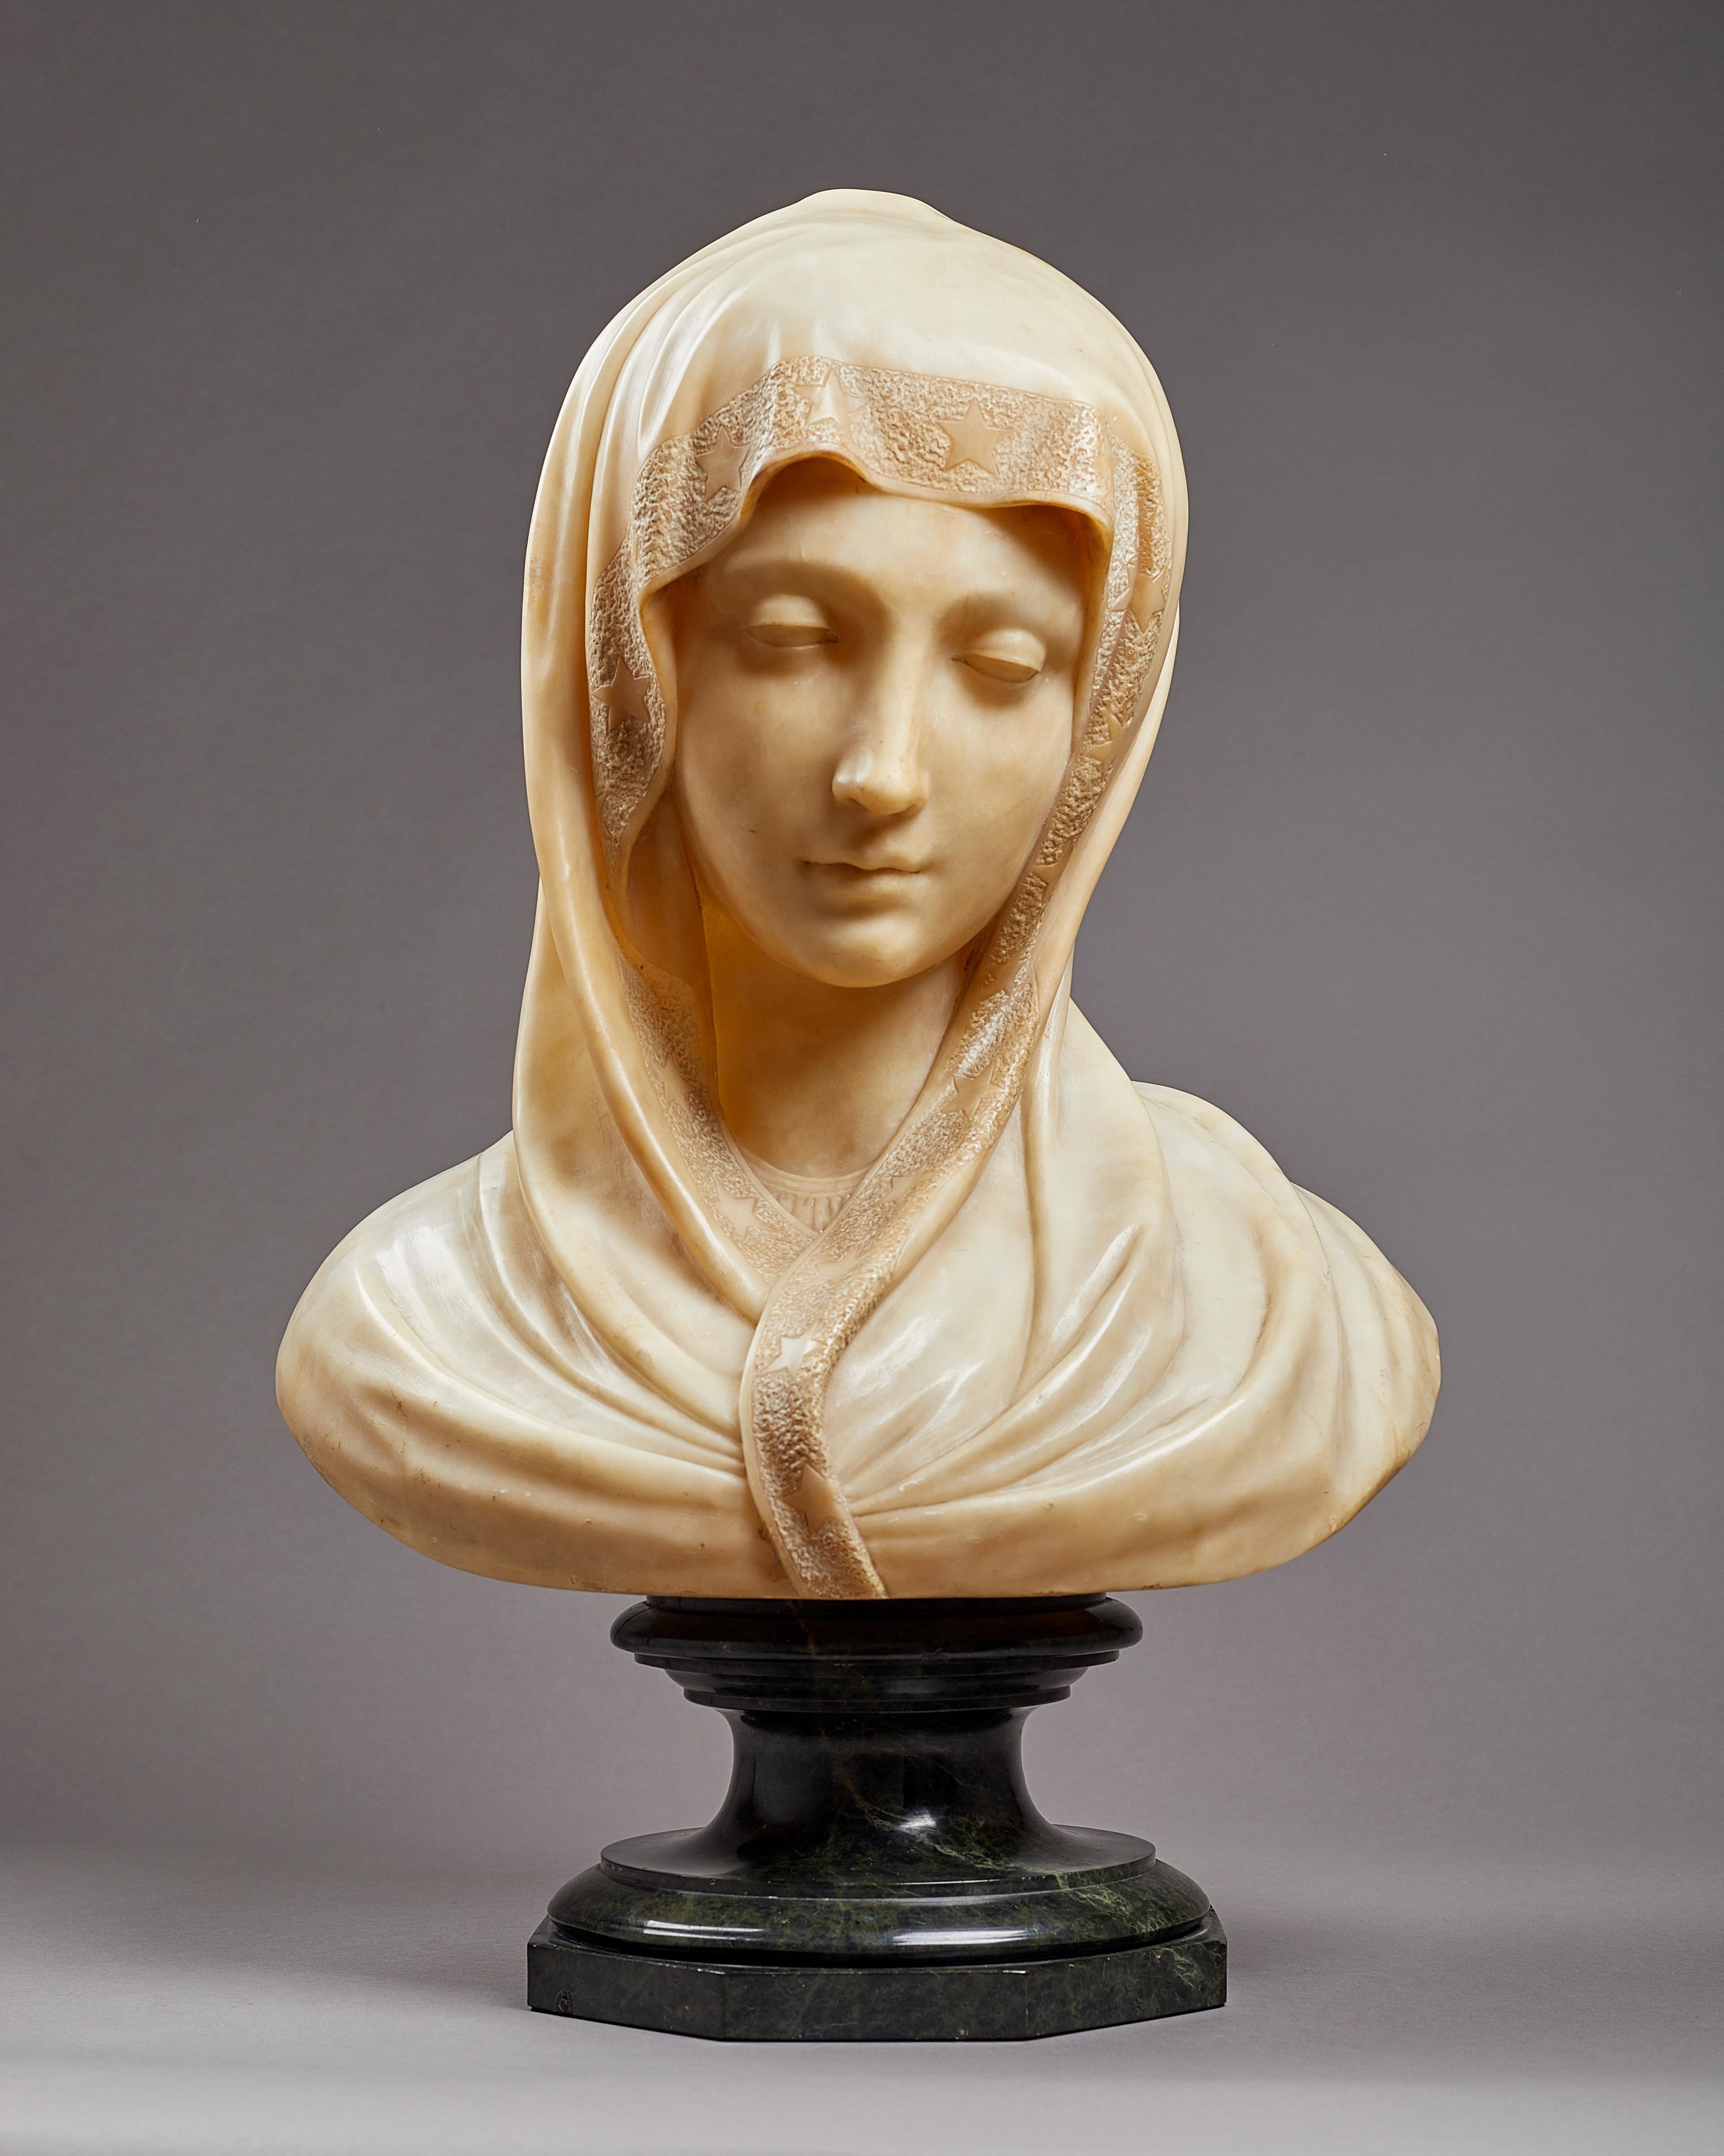 Bust of the Madonna as the ‘Lady of Our Sorrows’ (Mater Dolorosa)
Italian, possibly Florence, late 19th century
Alabaster, on a separate green serpentine socle
Height: 40 cm. / 15 ¾ inches , overall 50 cm. / 19 ½ inches

In the Renaissance and